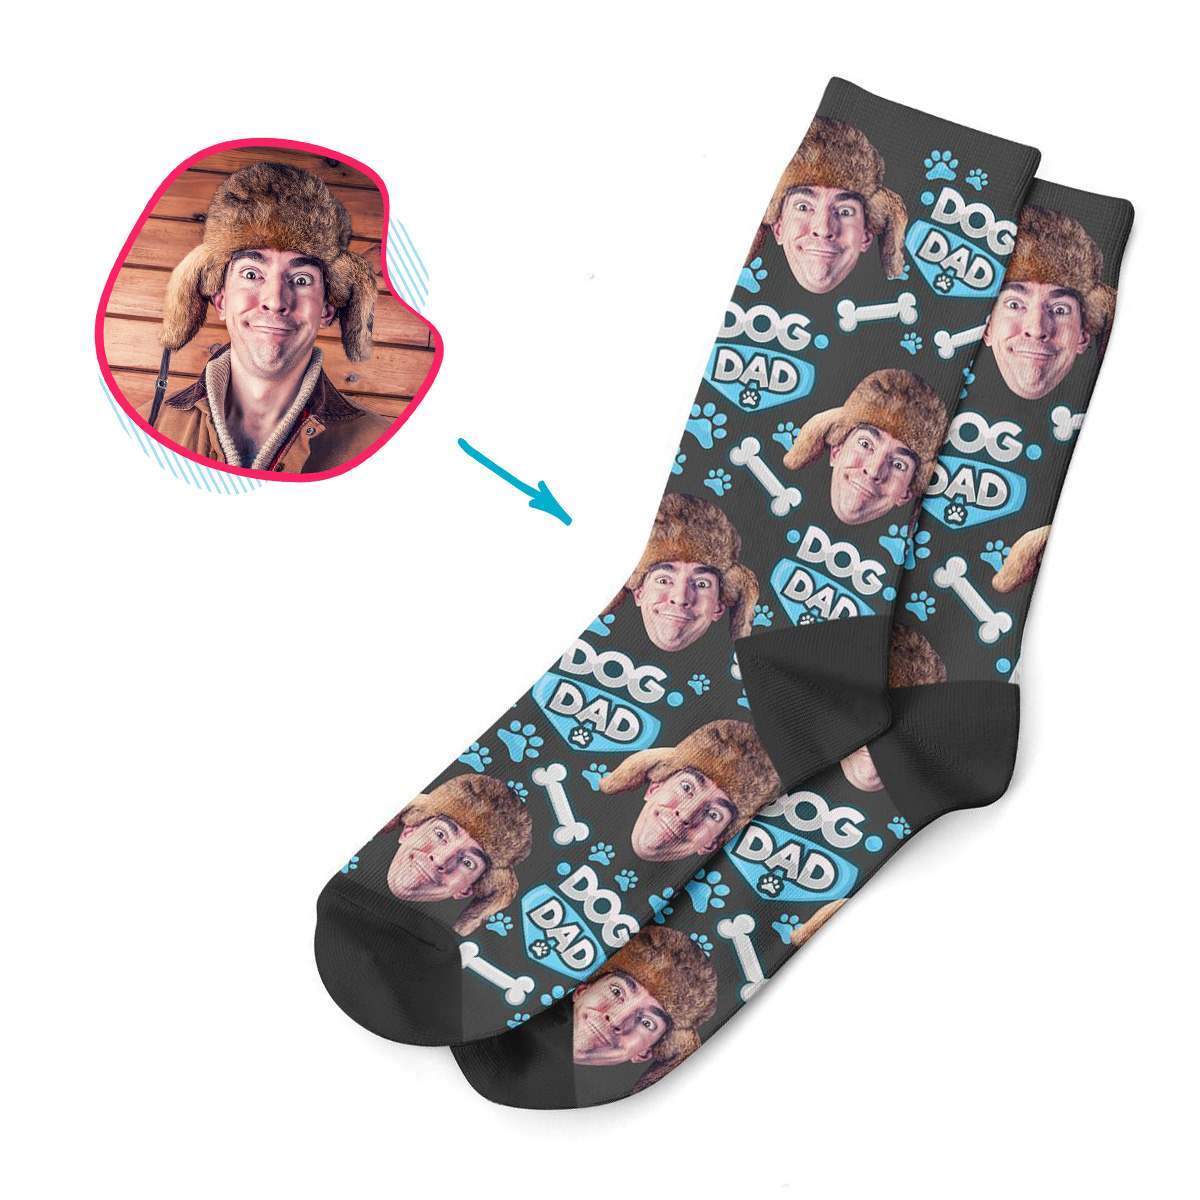 dark Dog Dad socks personalized with photo of face printed on them